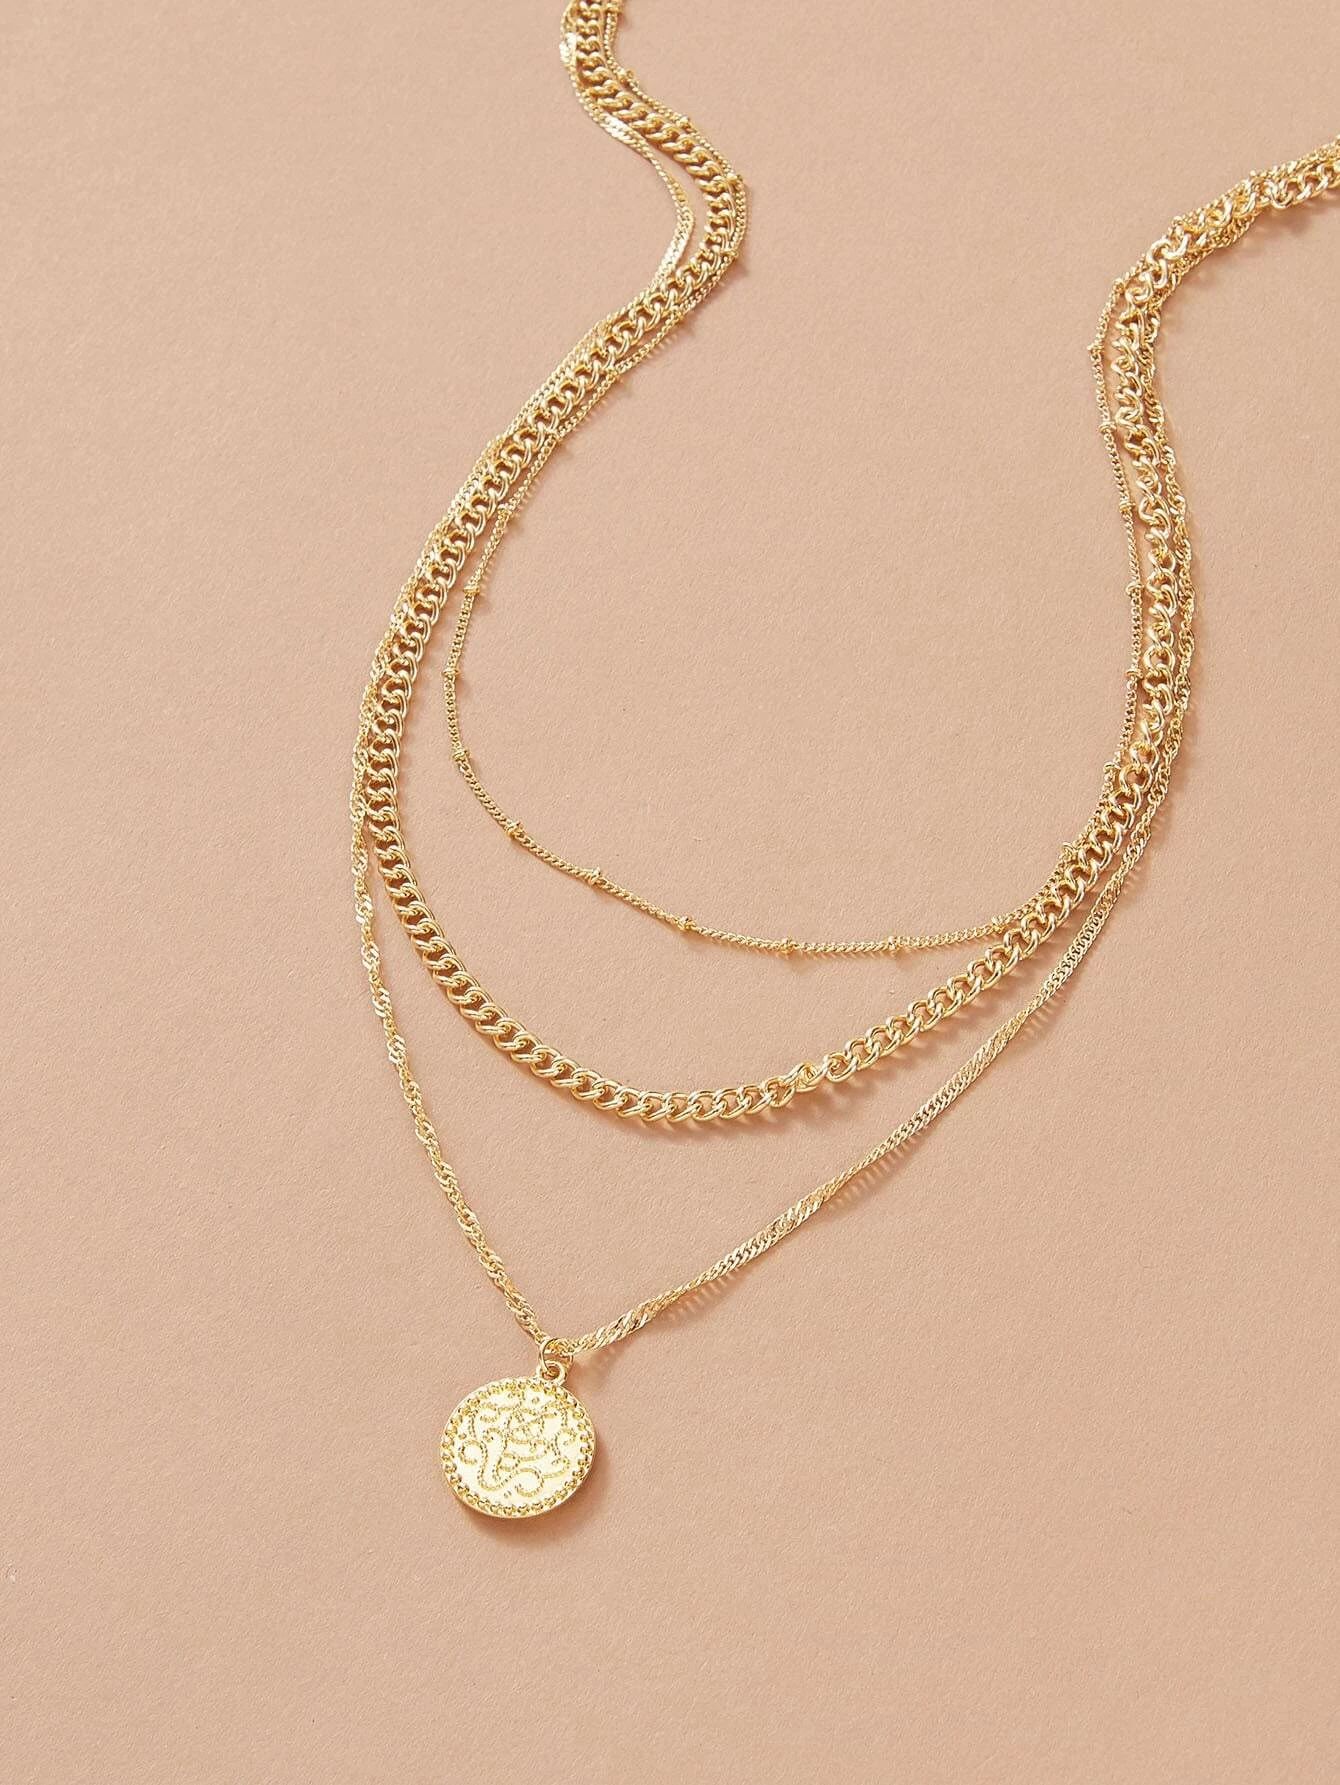 1pc Coin Pendant Layered Chain Necklace | SHEIN